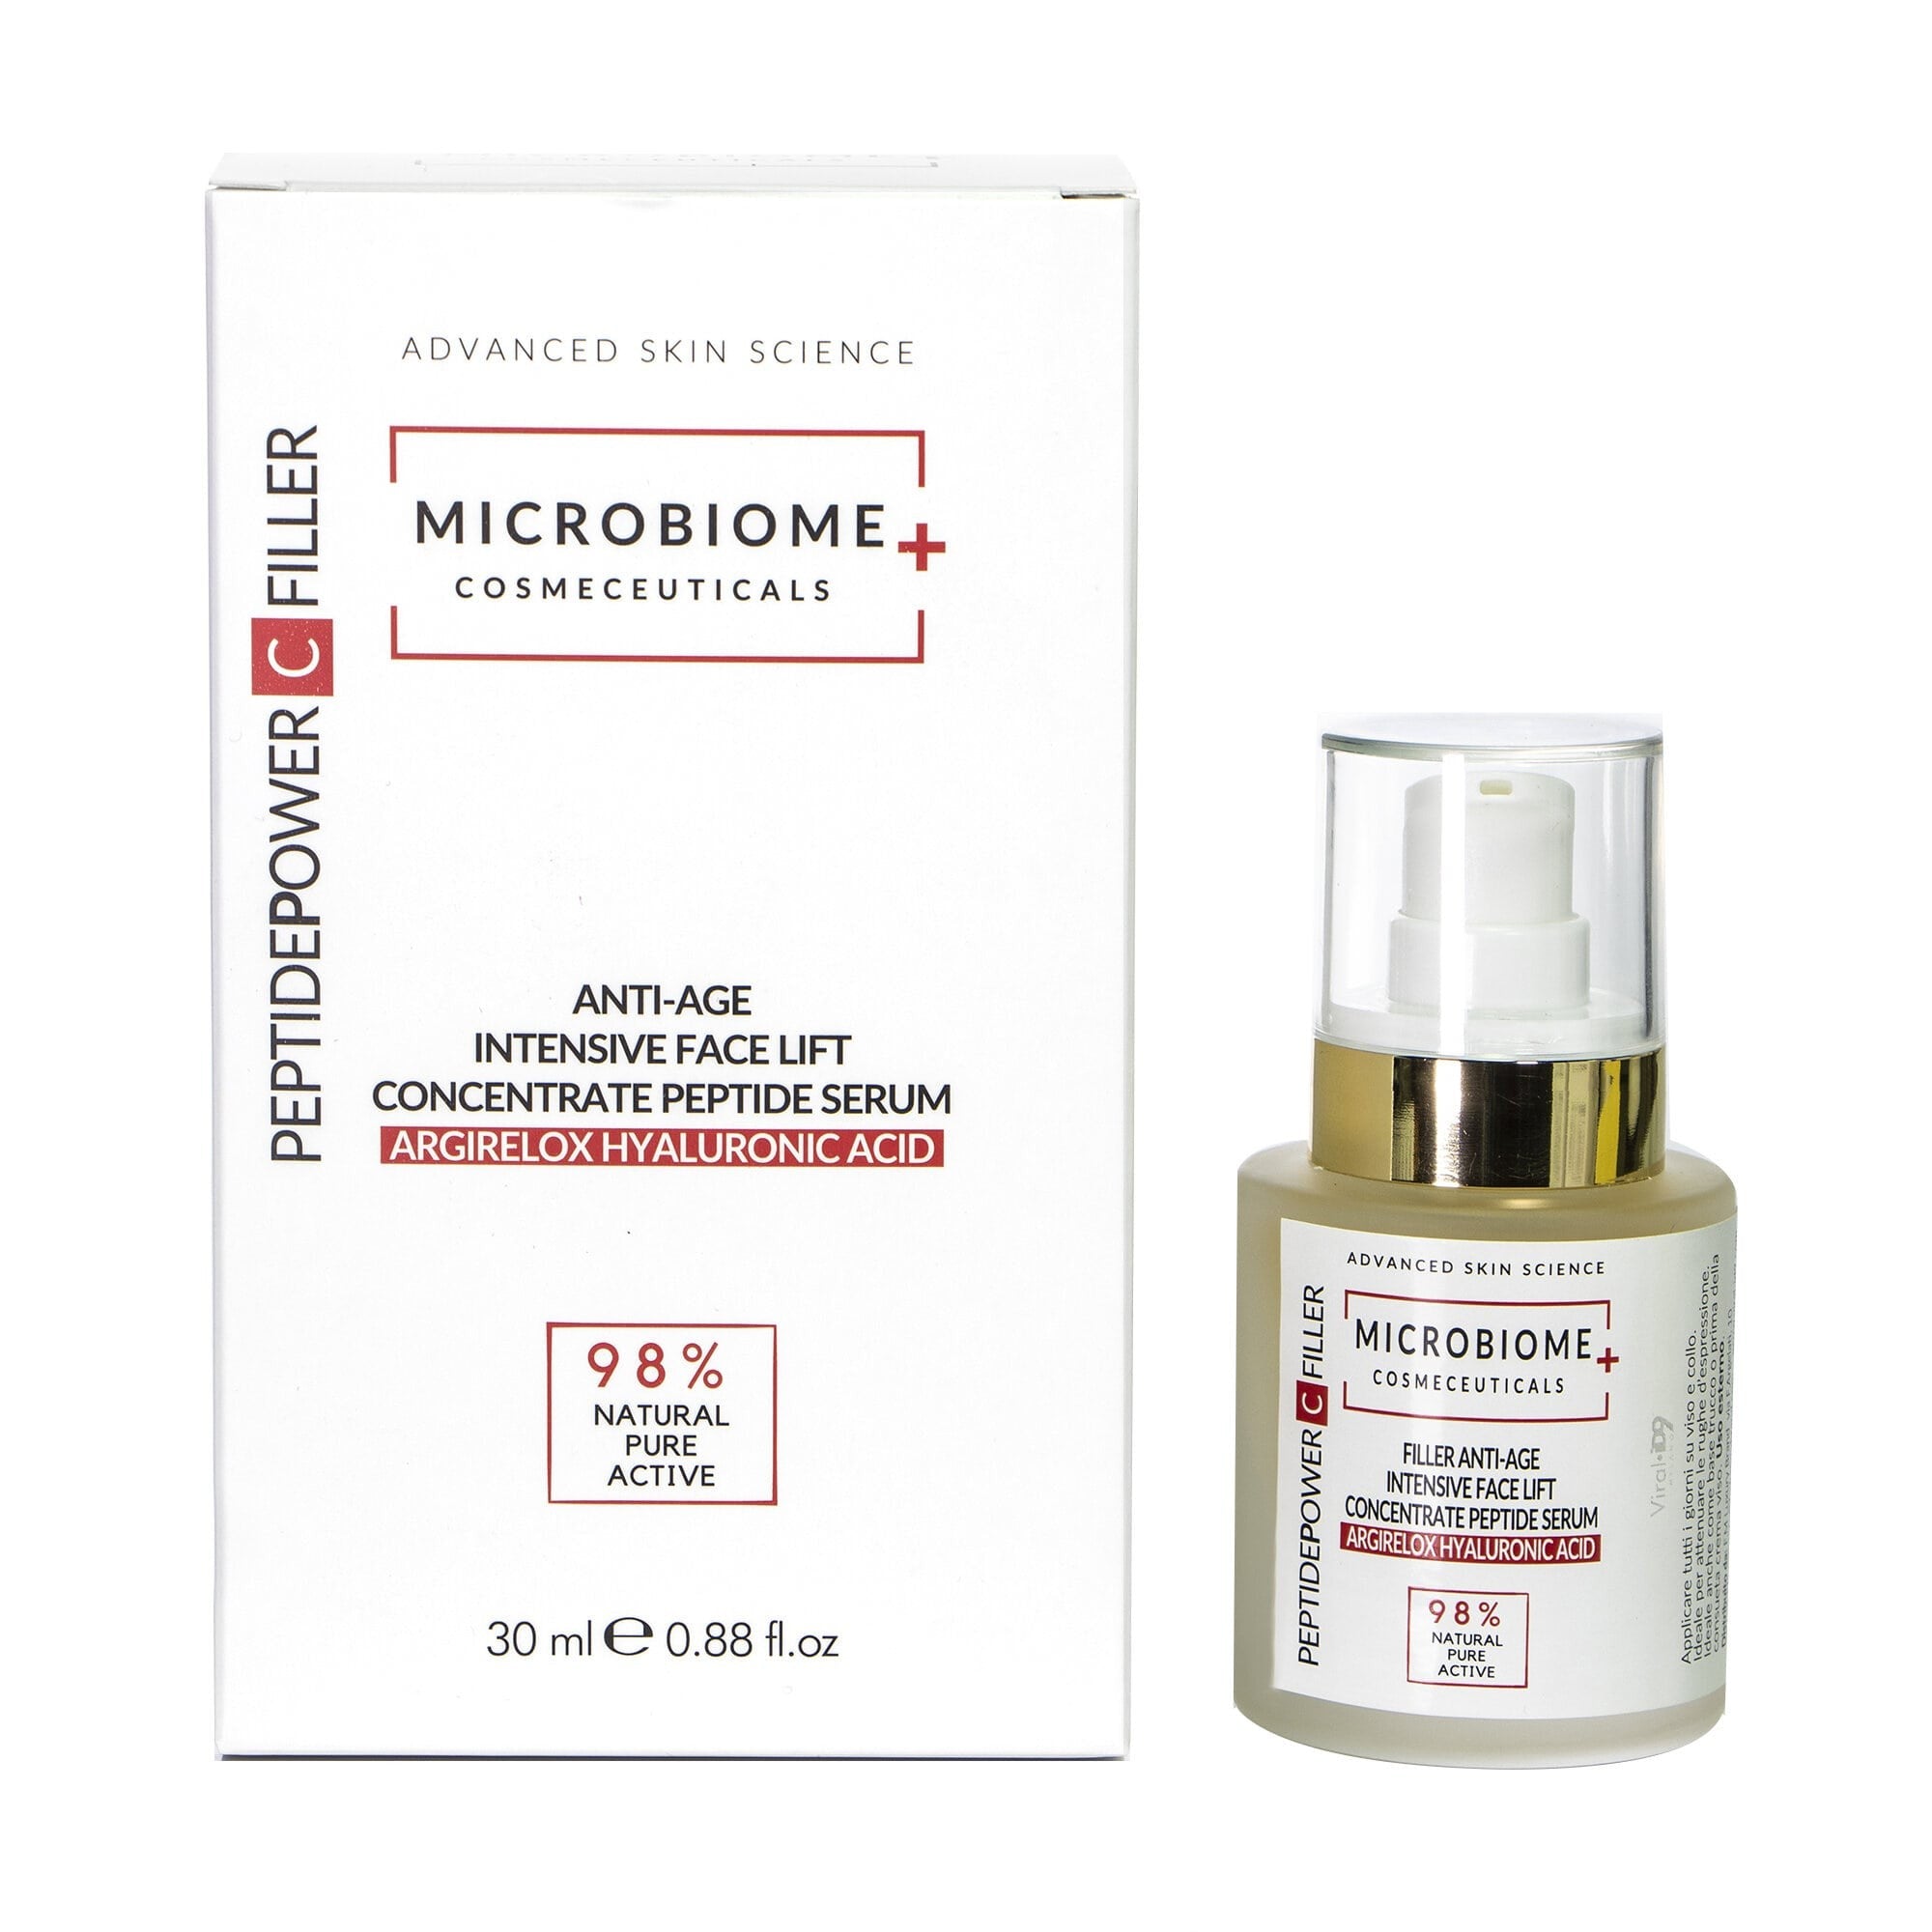 Microbiome Anti-Age Intensive Face Lift Concentrate Peptide Serum 30 ml